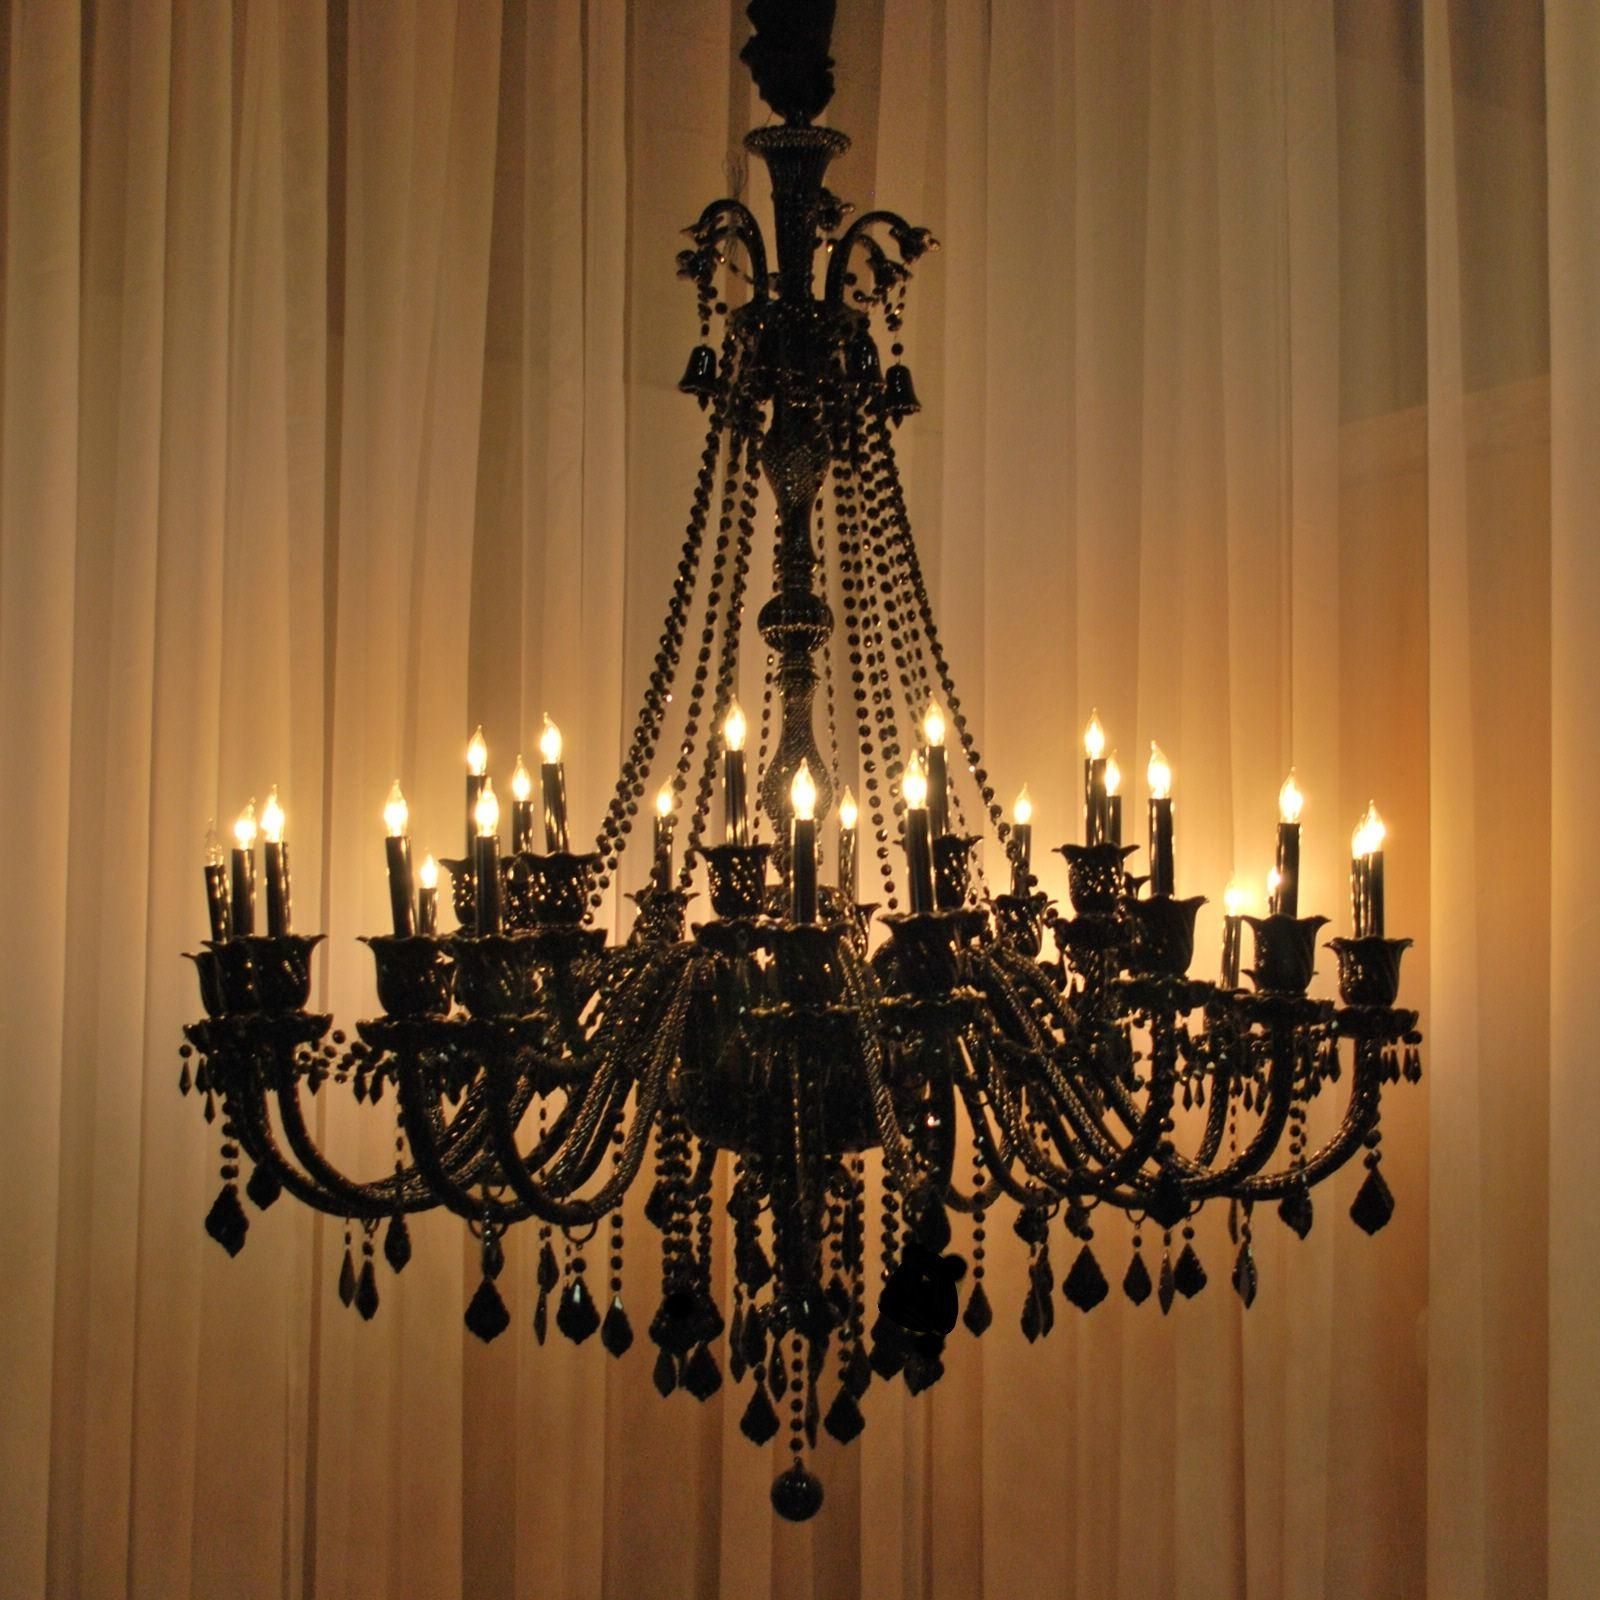 Best And Newest Giant Chandeliers Intended For Chandelier, Chandeliers, Crystal Chandelier, Crystal Chandeliers (View 3 of 15)